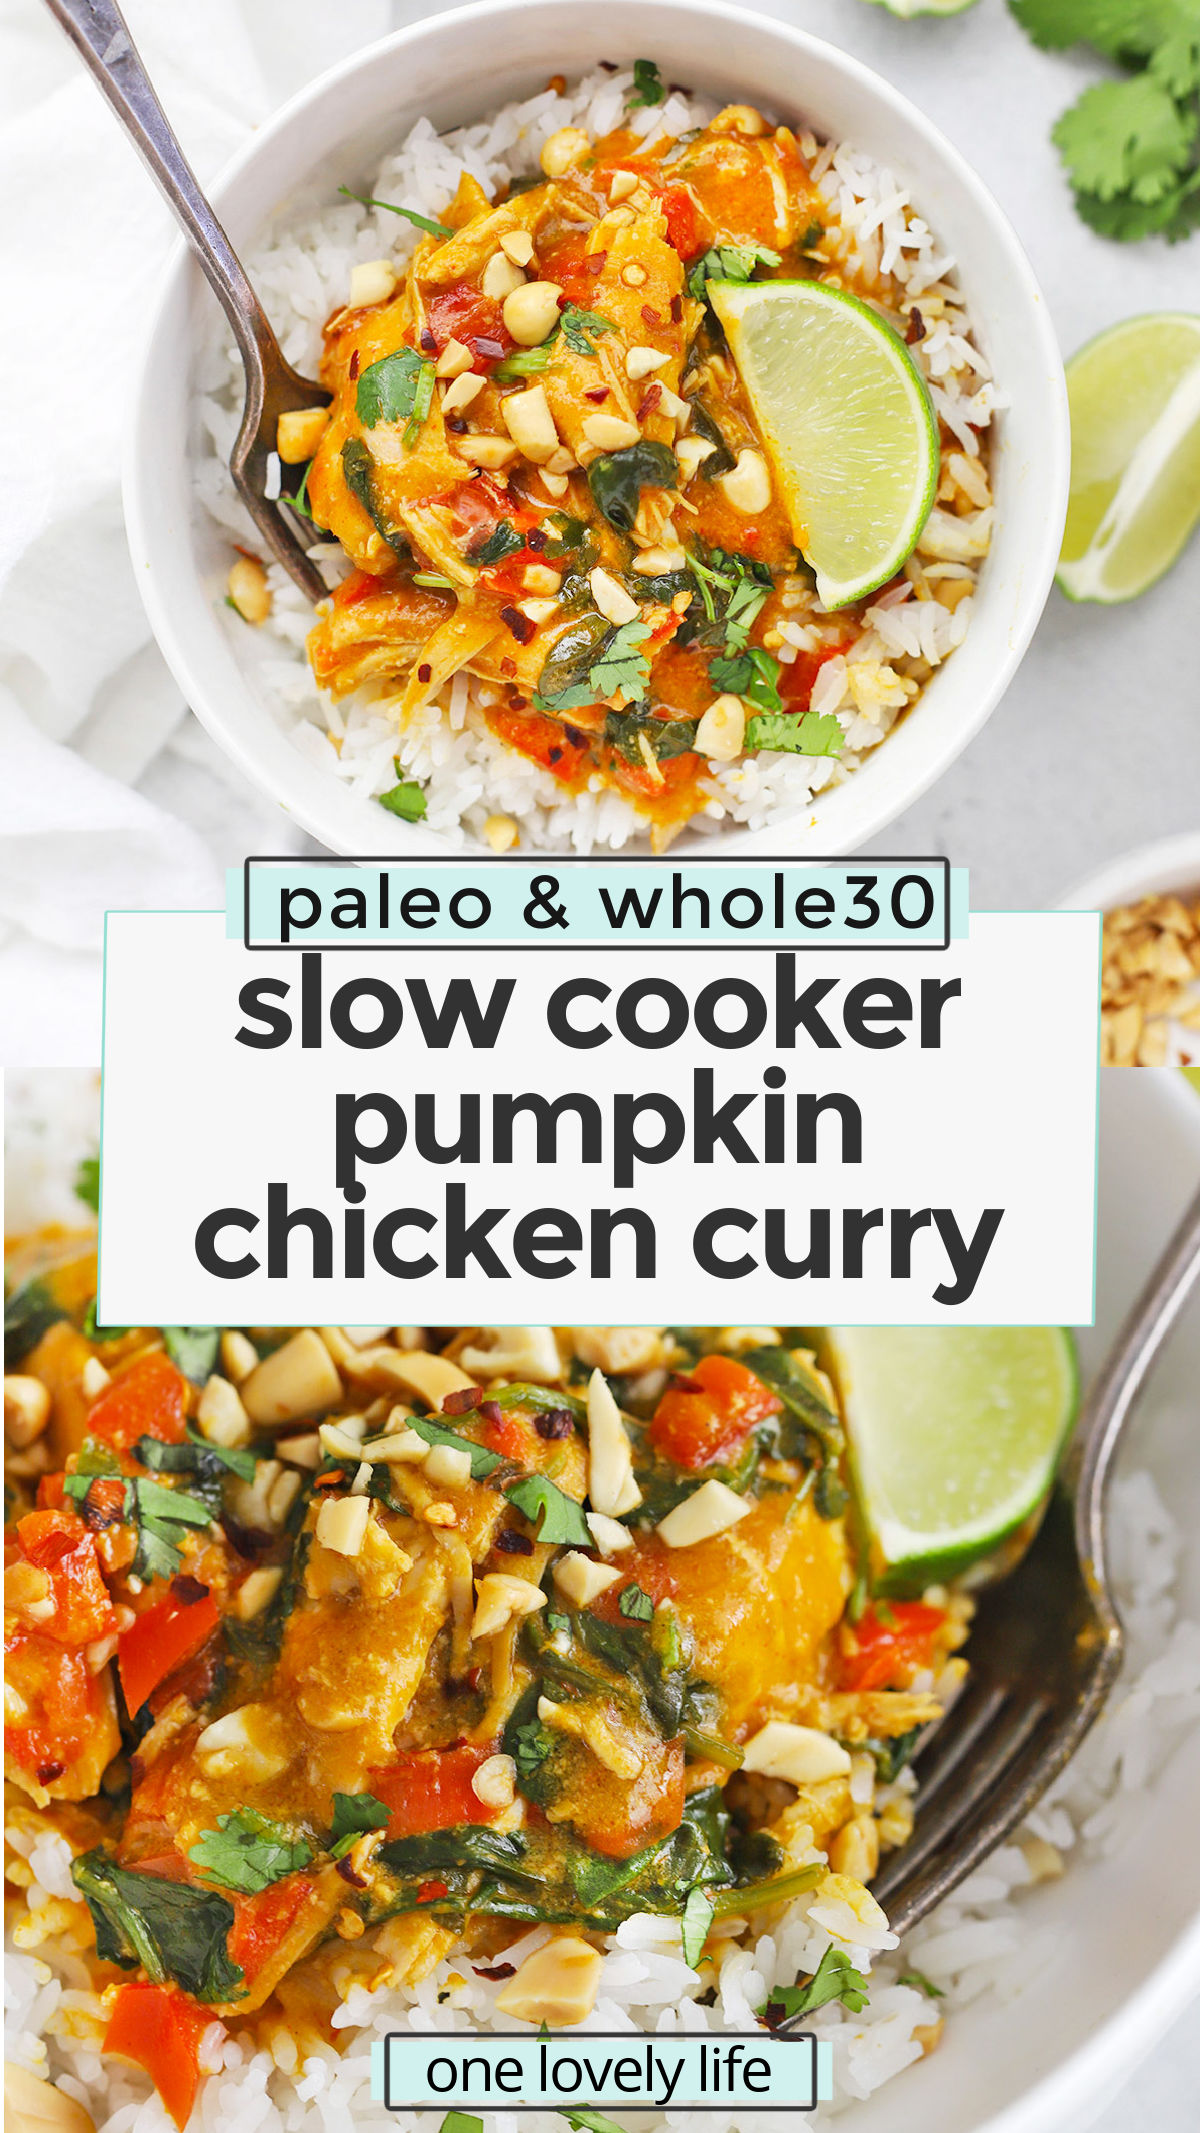 Slow Cooker Pumpkin Chicken Curry - This cozy pumpkin curry has tender chicken, colorful veggies & a mega-flavorful sauce to warm you up from the inside out. (Paleo, Whole30, Gluten-Free) // Pumpkin Curry Recipe // Slow cooker curry // savory pumpkin recipes // healthy dinner // paleo slow cooker recipe // whole30 slow cooker recipe // paleo chicken // healthy pumpkin recipe